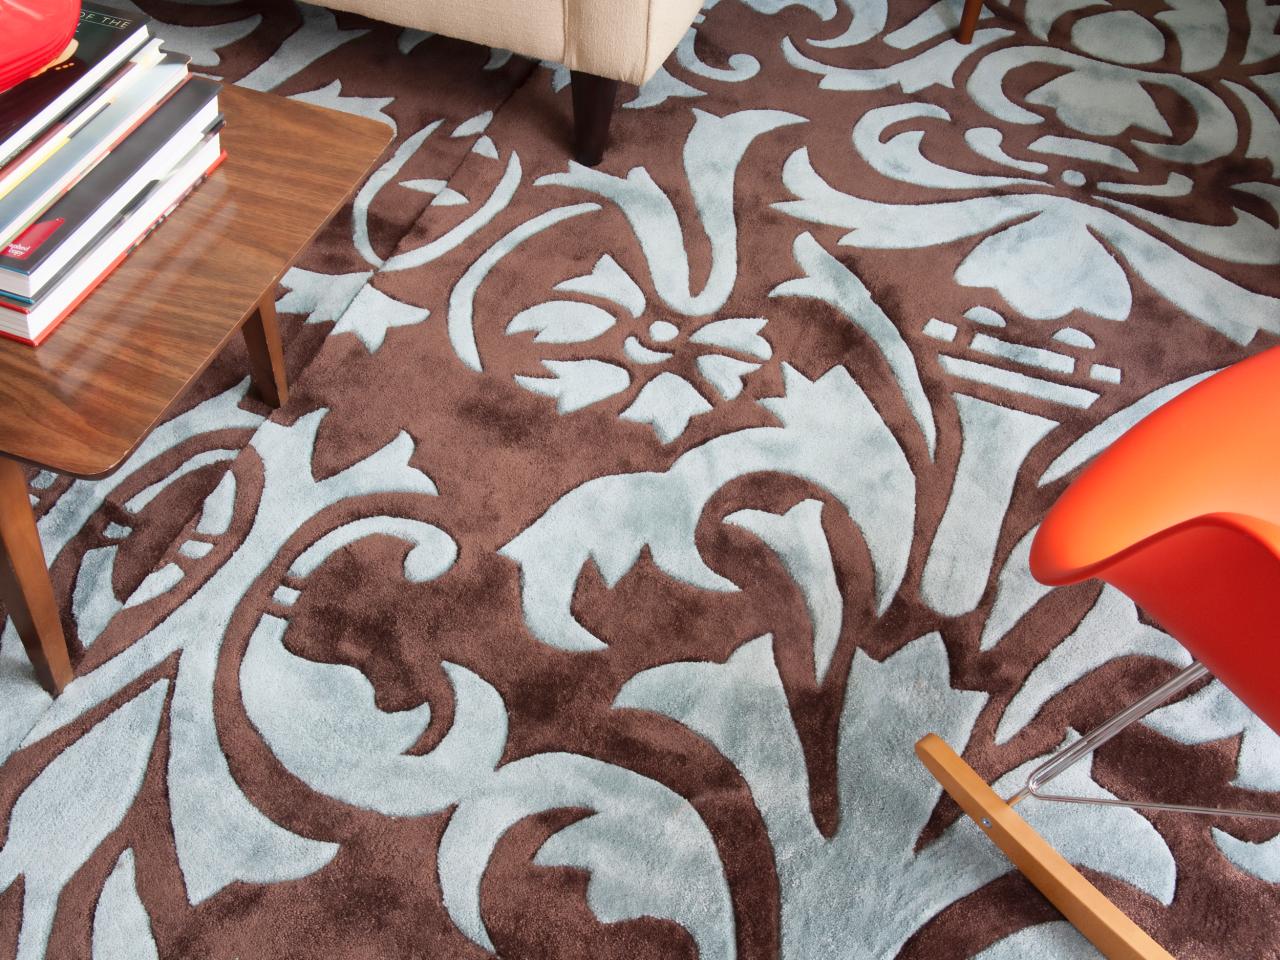 Can carpets be customized?